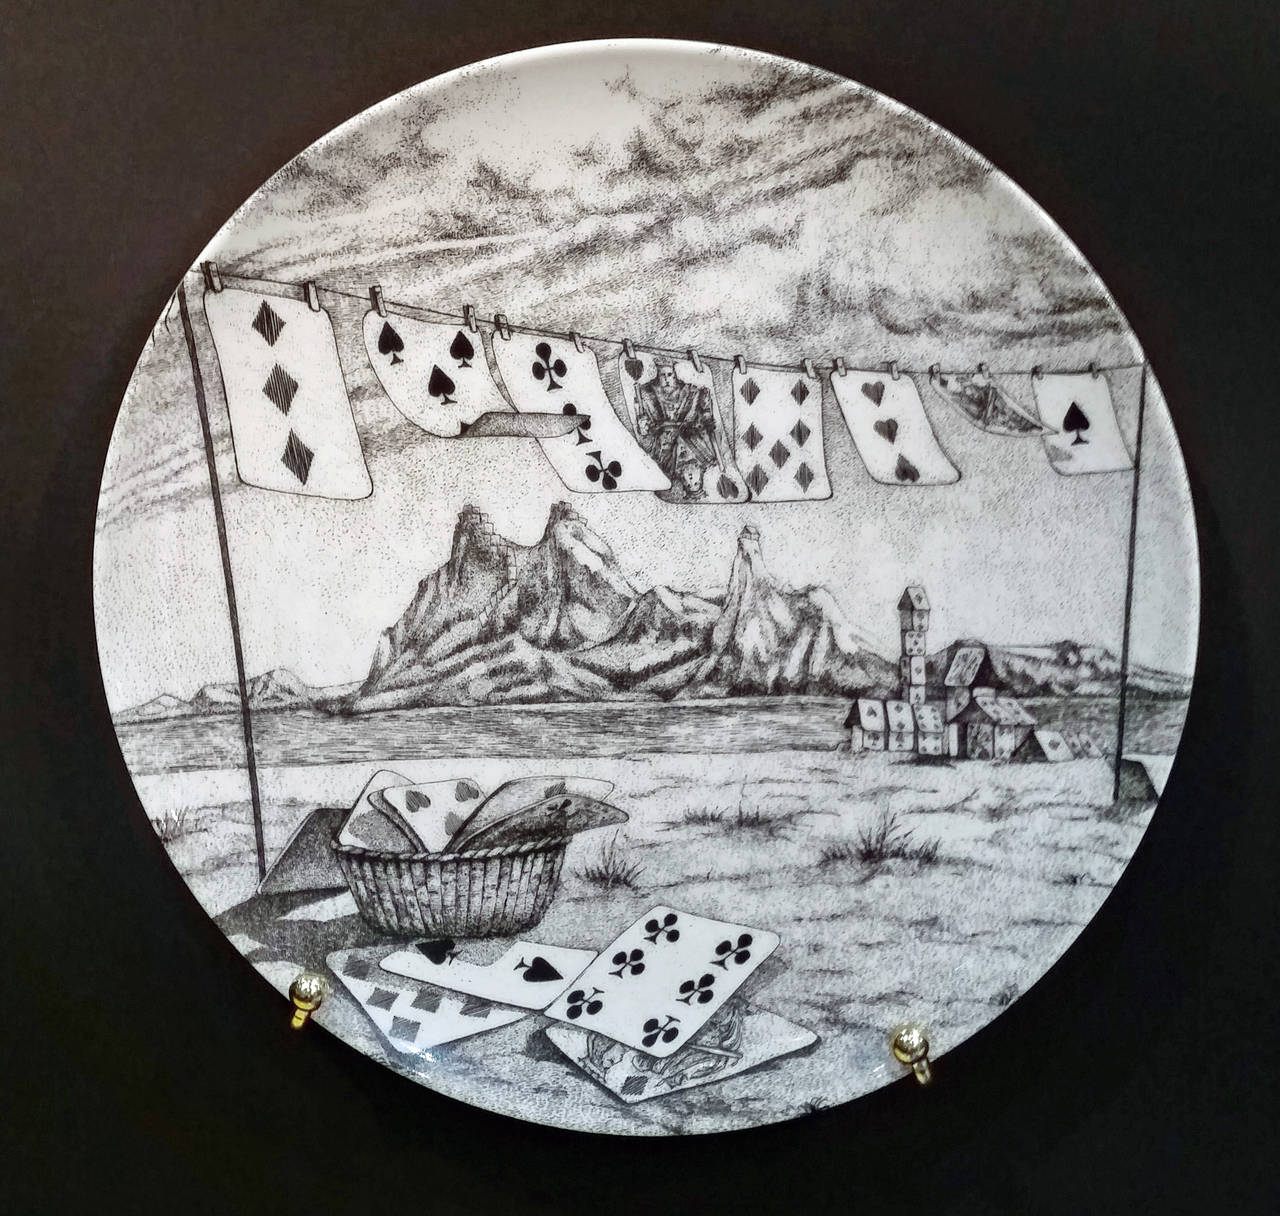 (House of Cards) Pattern 

Each plate, numbered one through twelve, is decorated with a different surreal image of  landscapes or townscapes each with the building composed of playing cards and stacks of cards.

The mark on the base depicts two